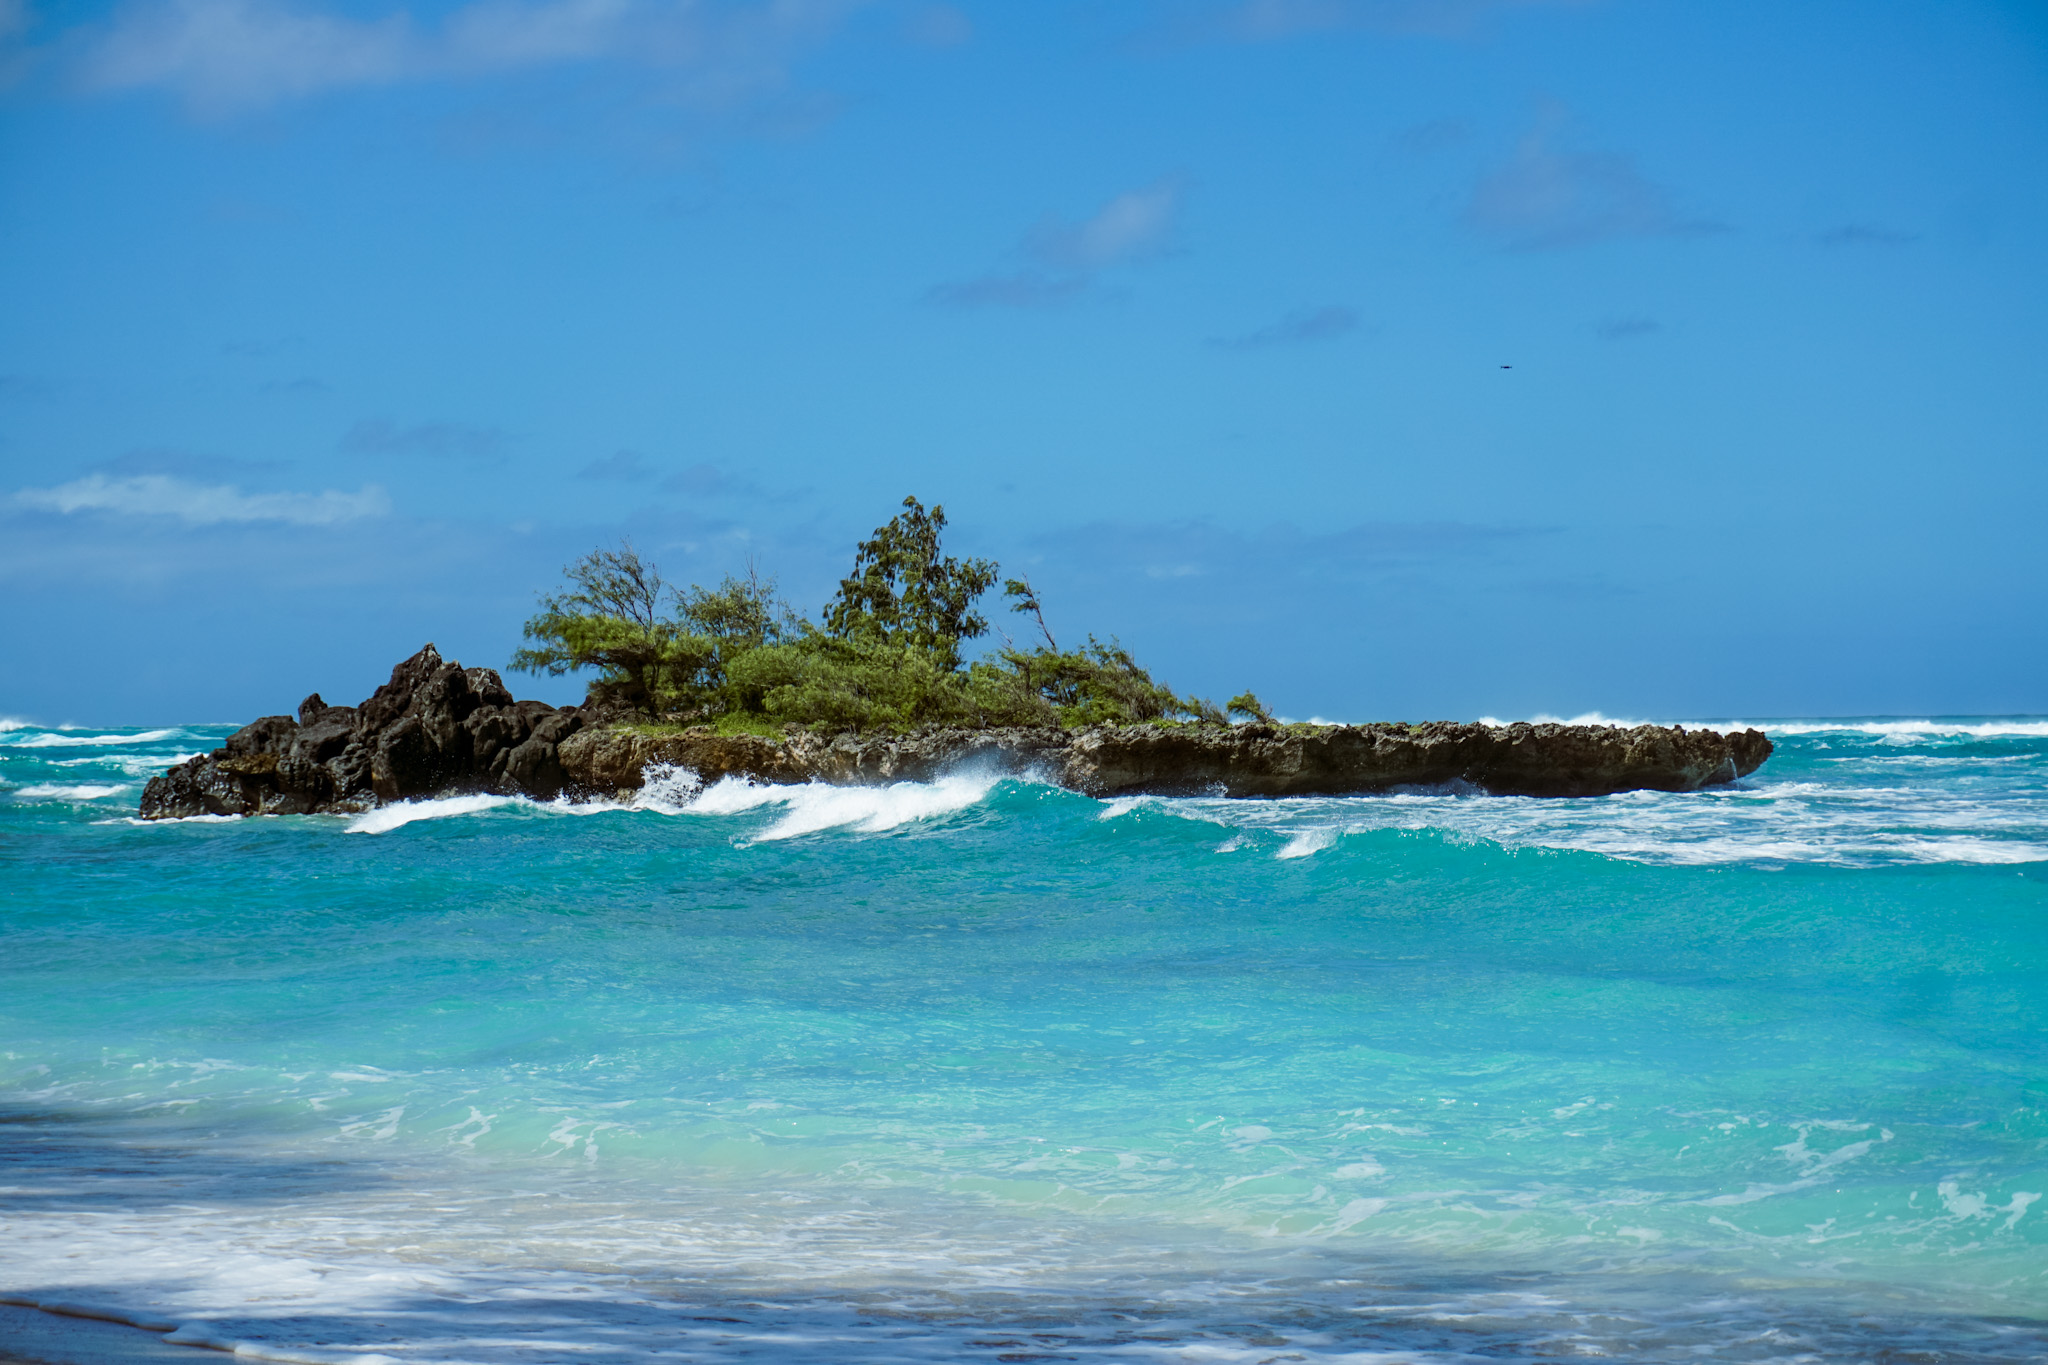 Close up of Rocky island in turquoise water at Hawaiian beach on the North Shore of Oahu